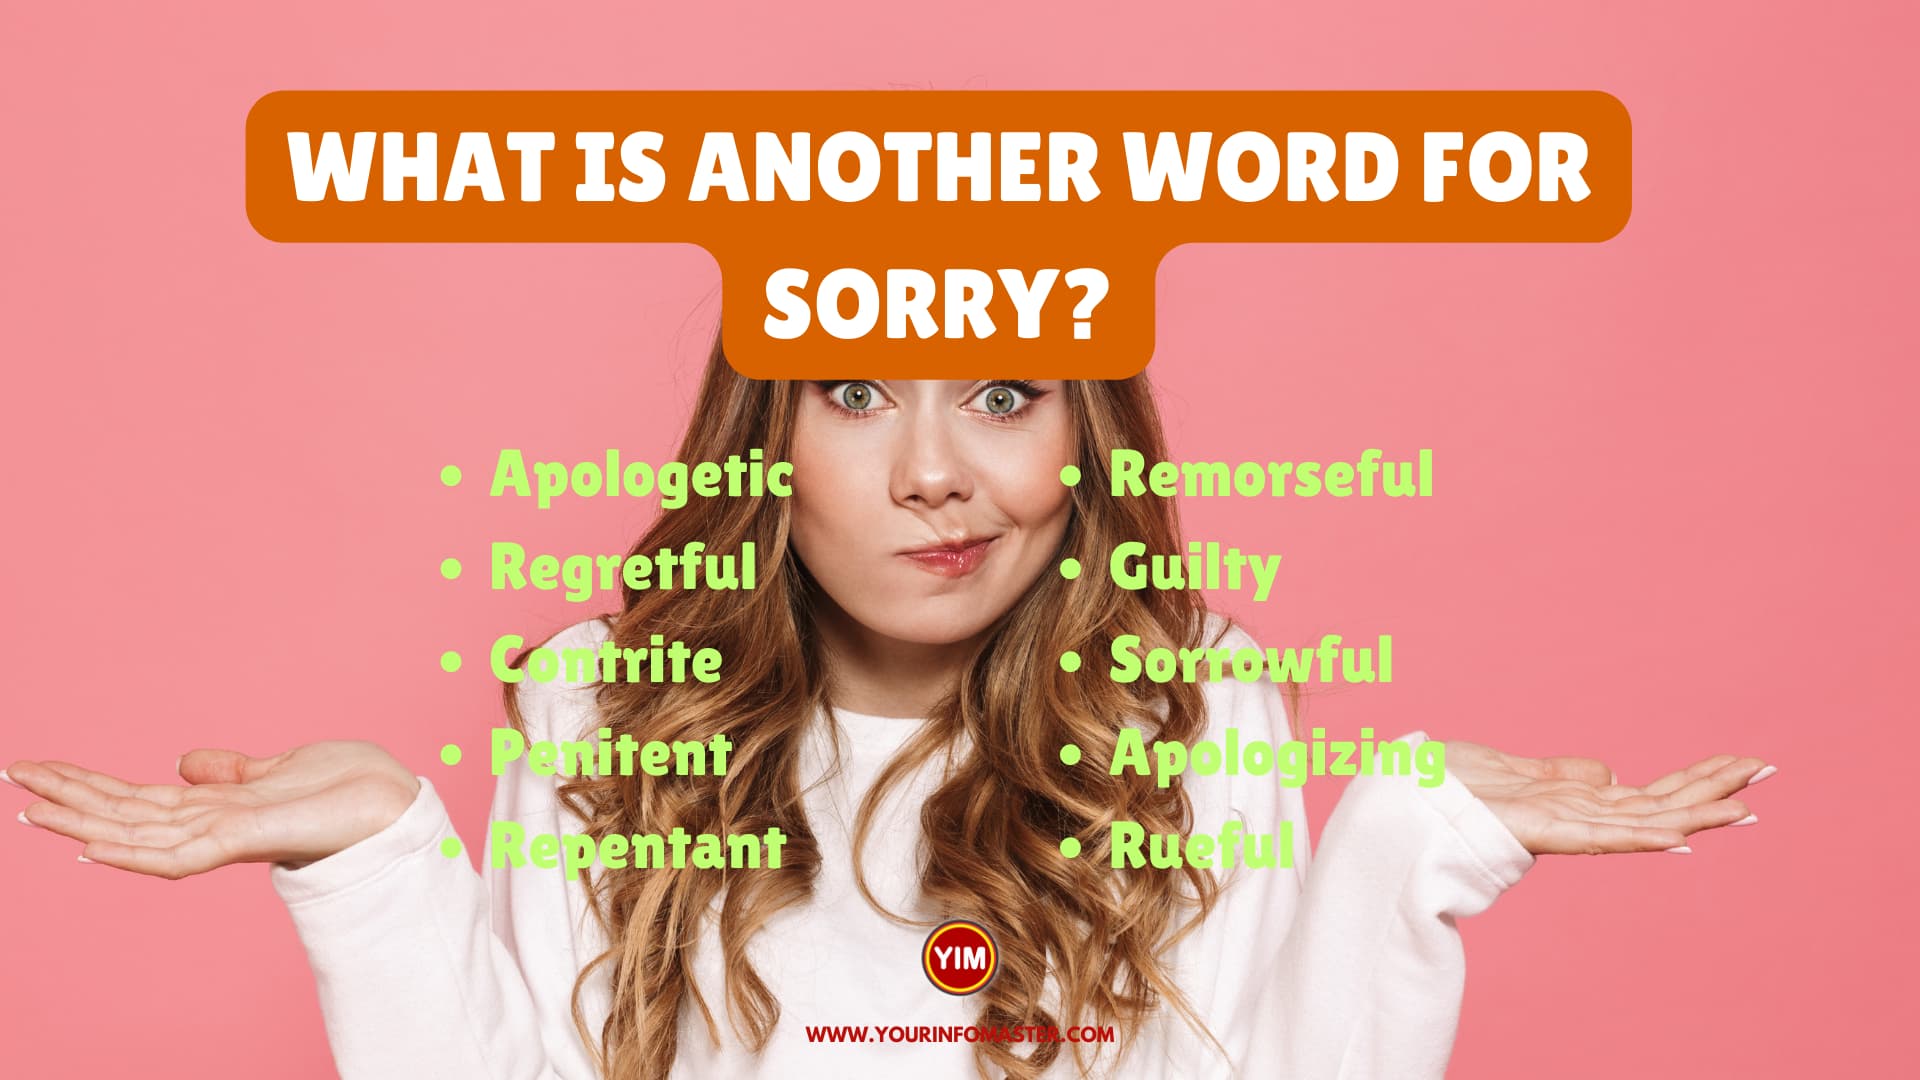 What is another word for Sorry